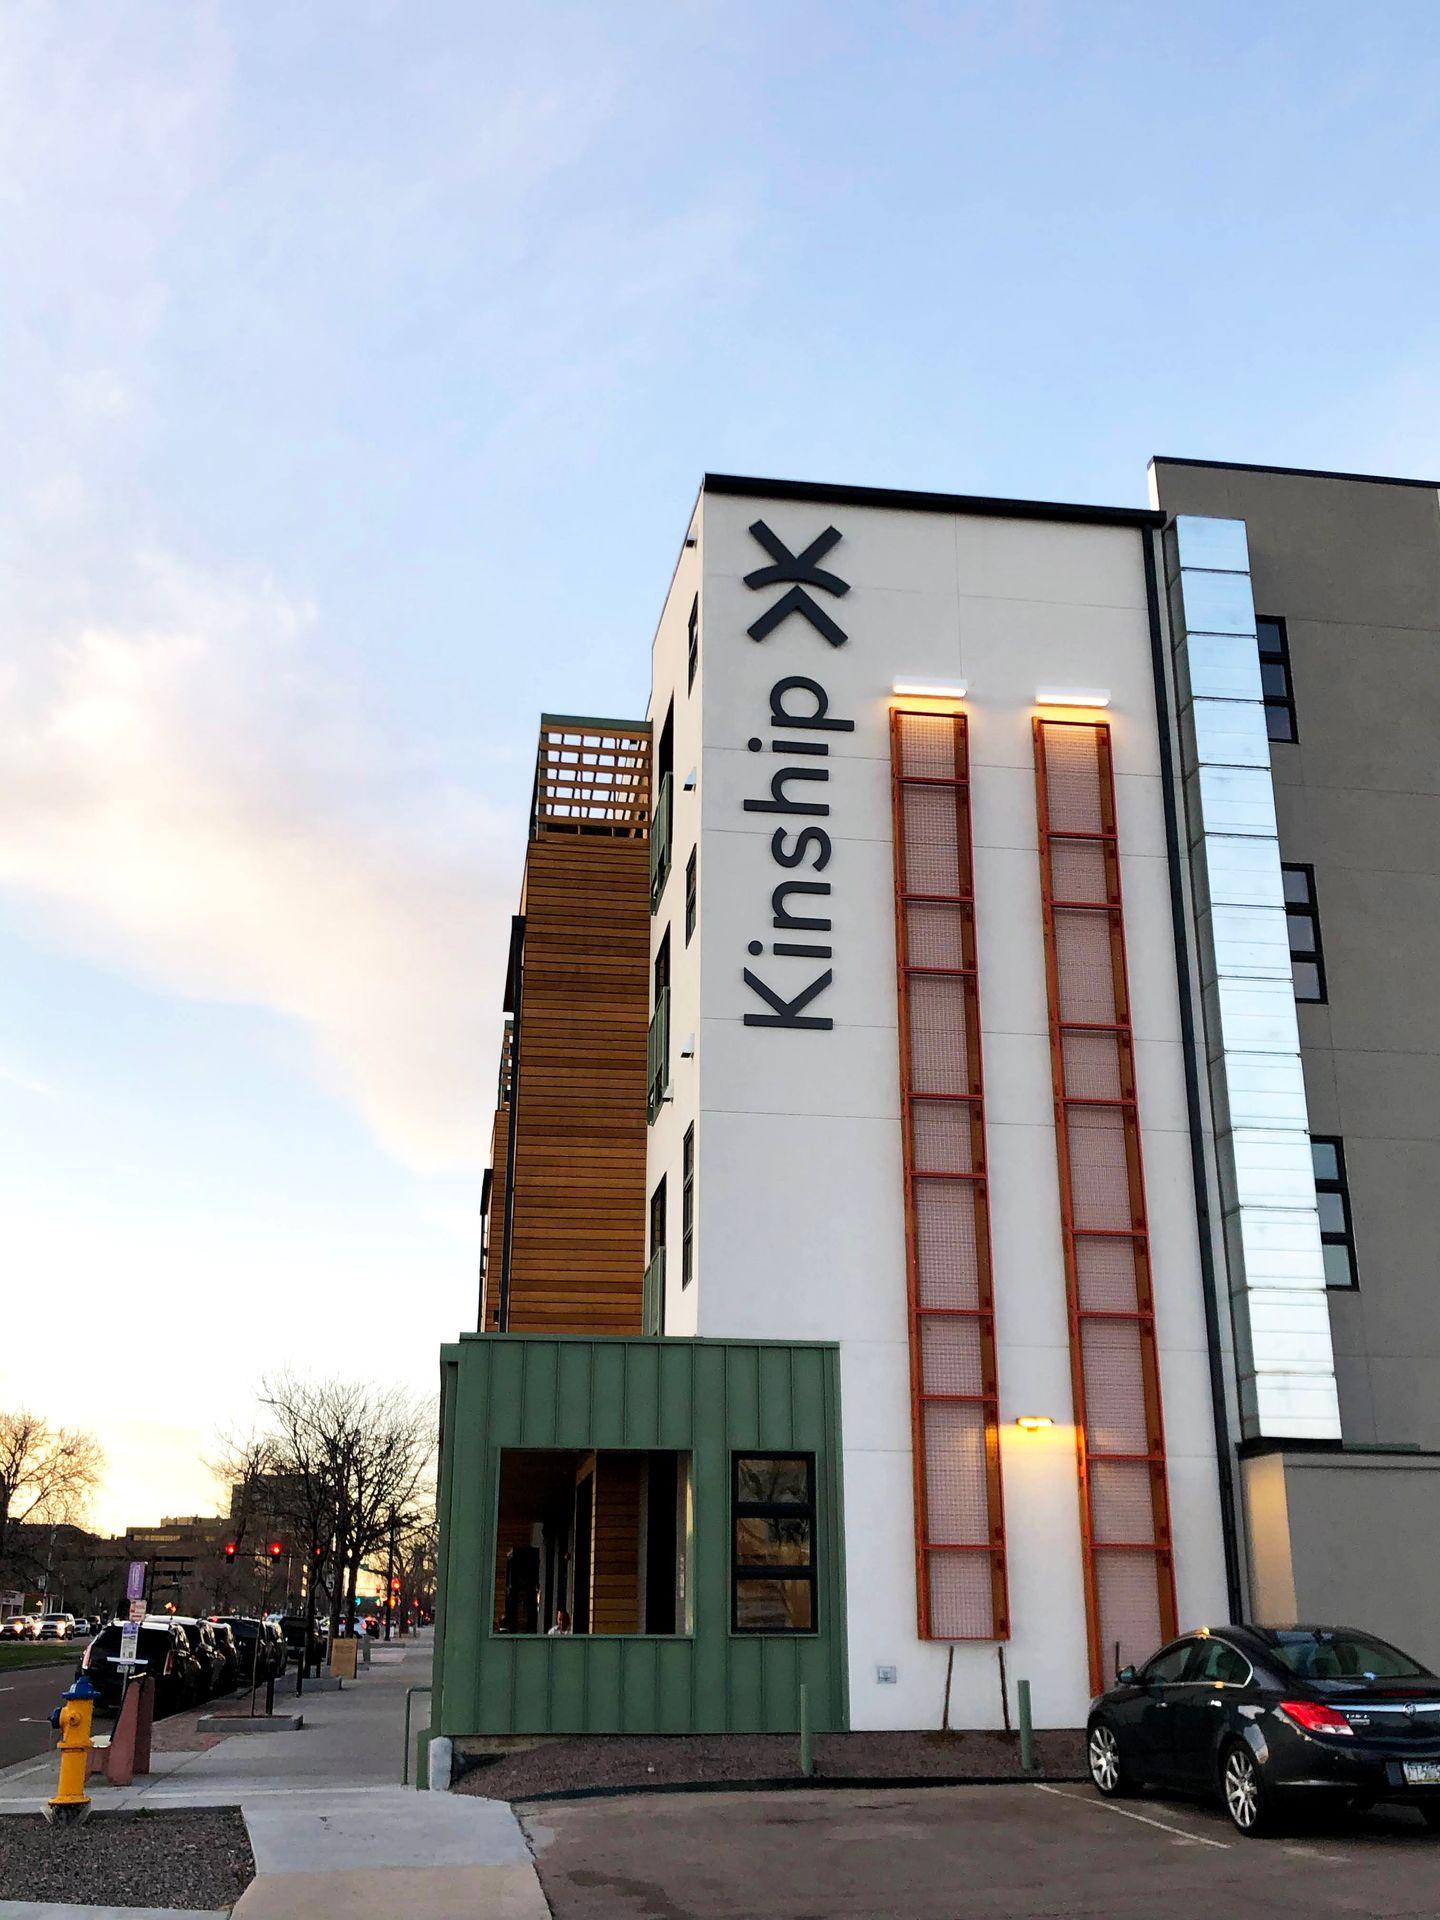 The Kinship Landing Hotel from the outside. The building is several stories tall and says "Kinship"